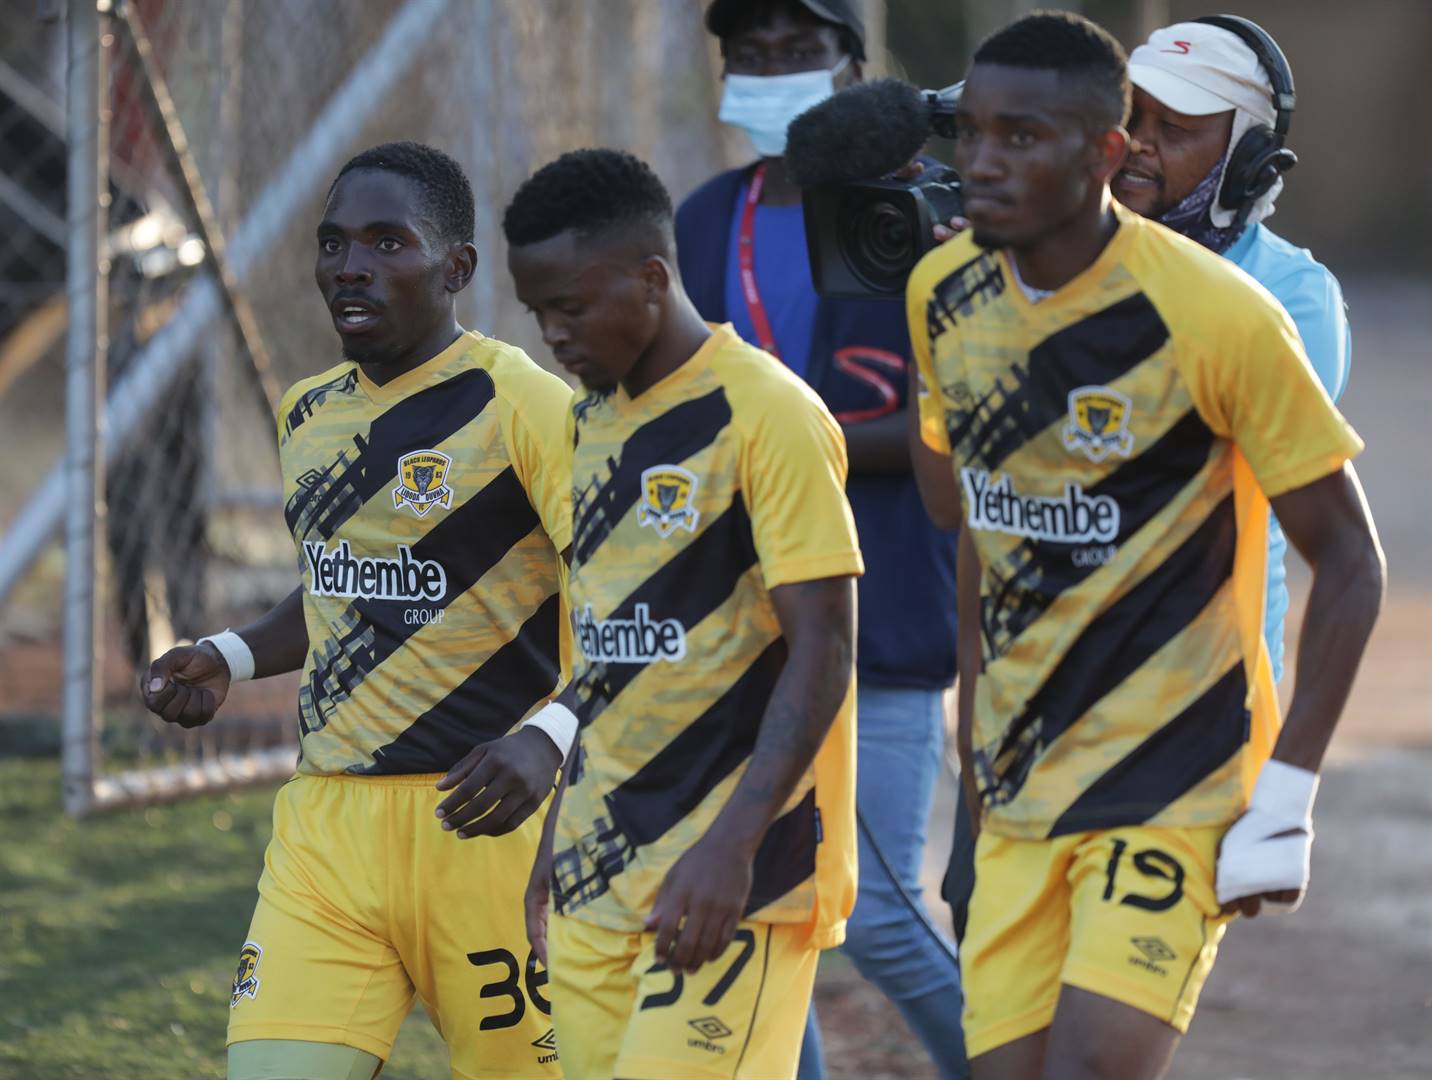 Black Leopards two-goal hero Tiklas Thutlwa is joined in celebration by his teammates Sanele Mthenjwa and Ovidy Karuru following their win over Kaizer Chiefs on Wednesday. Photo: Kabelo Leputu / BackpagePix